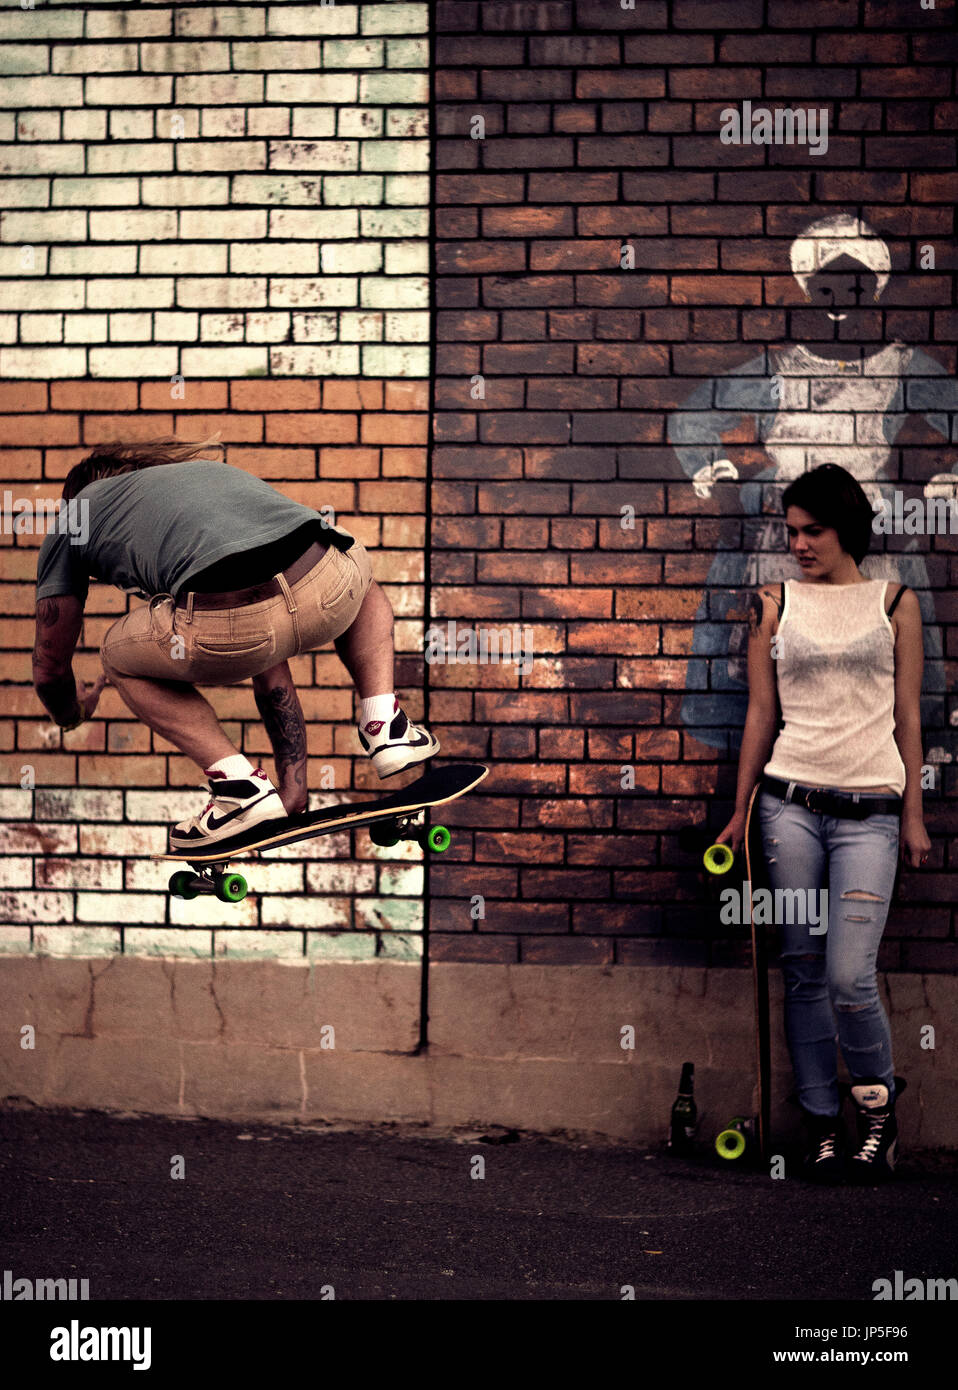 A young man and woman skateboarding in front of a brick wall. Stock Photo